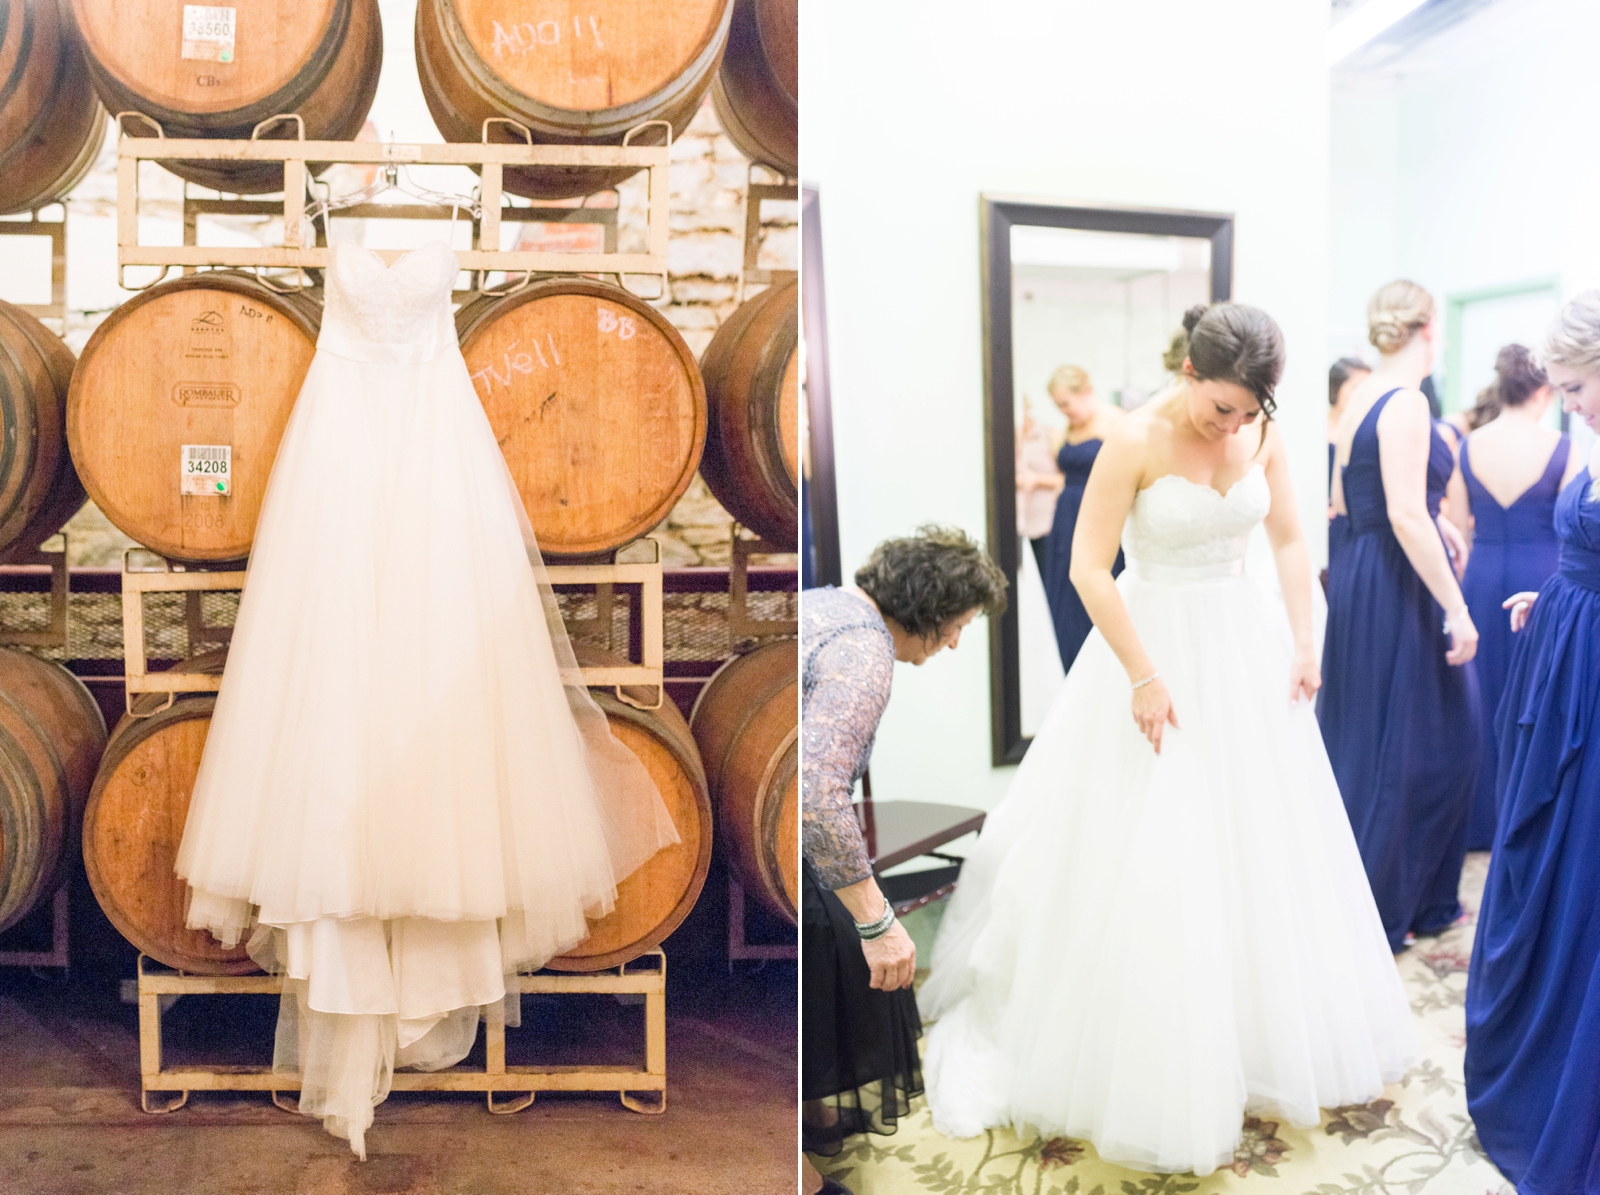 wine-barrels-with-a-wedding-dress-hanging-up-on-them